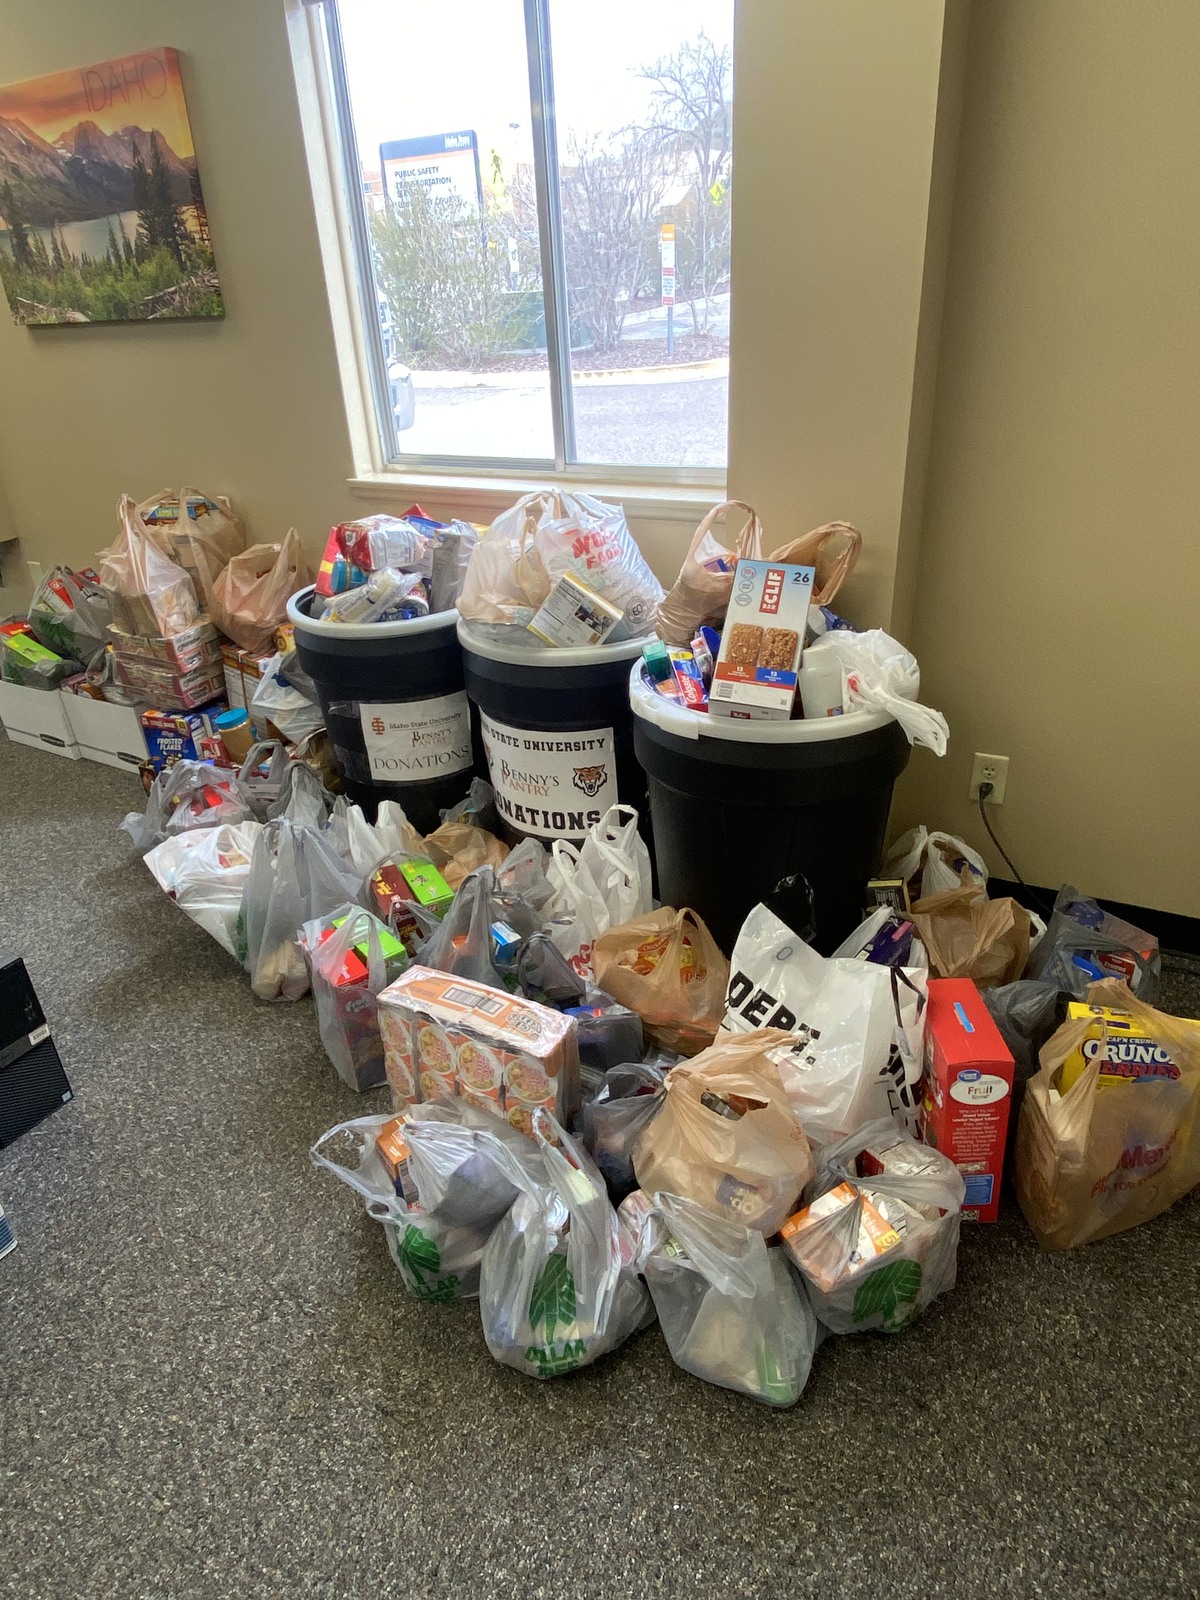 Food collected for Benny's Pantry totaling over 1200 pounds